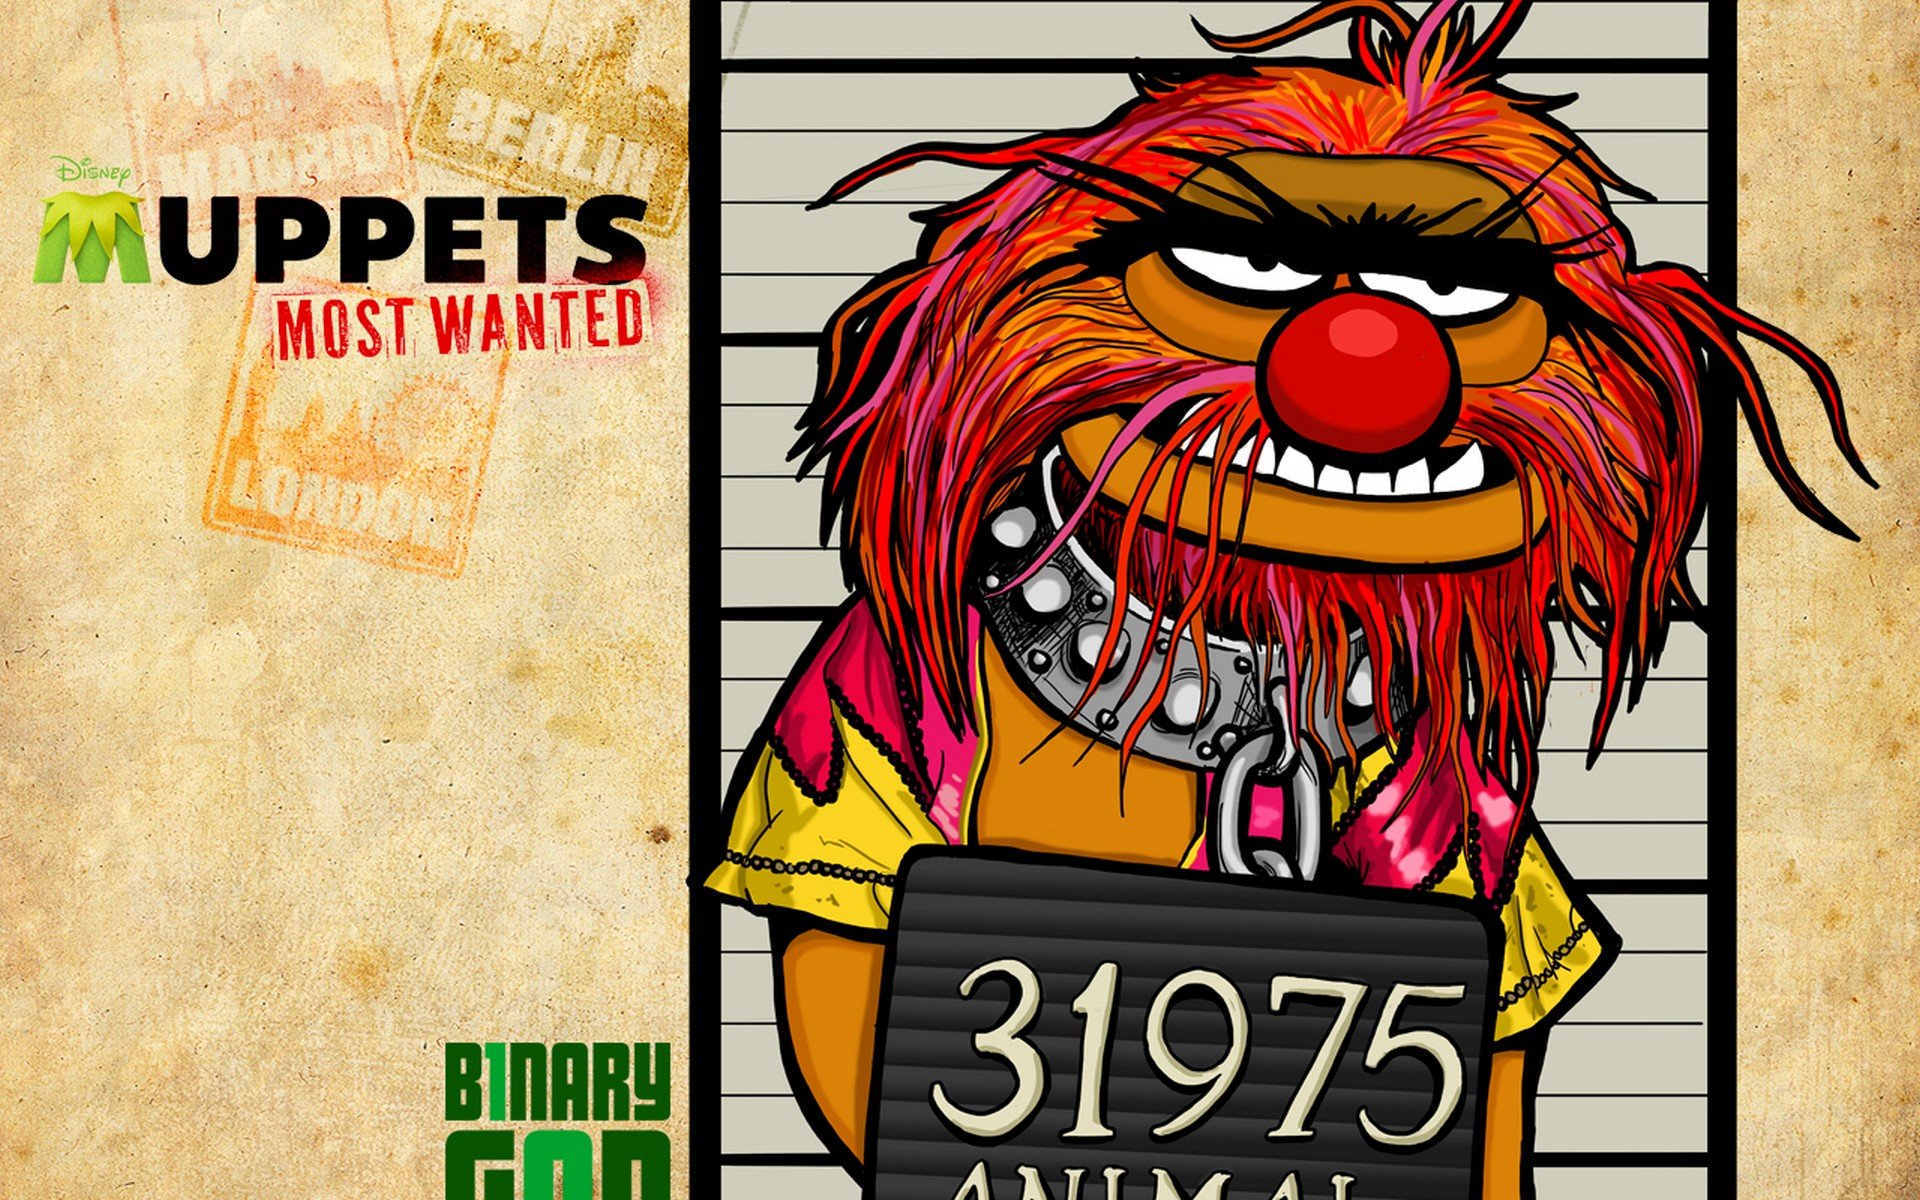 muppets most wanted movie poster